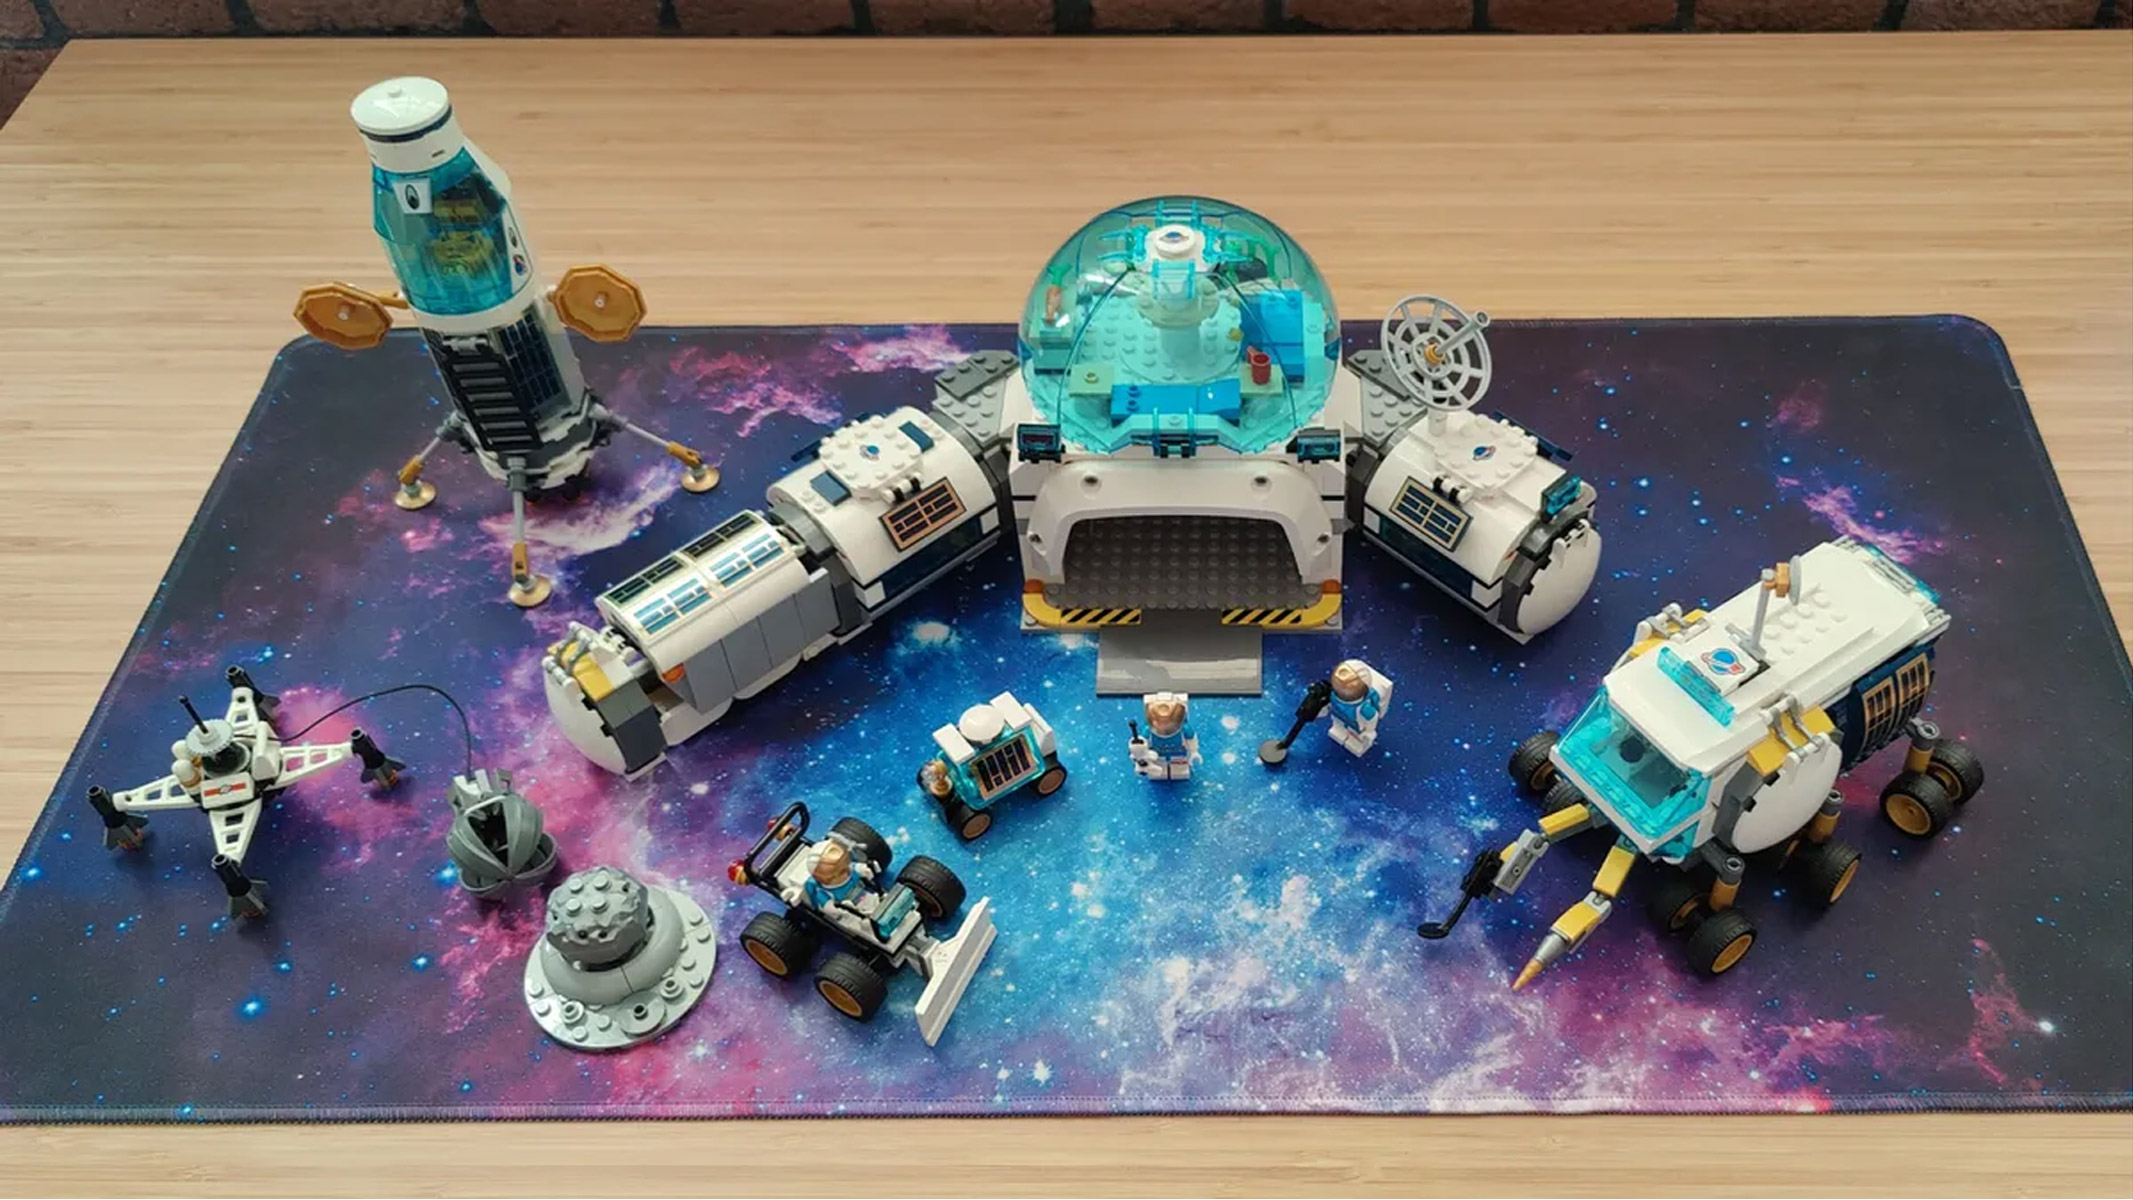 Lego City's Lunar Research Base is 20% off for Black Friday